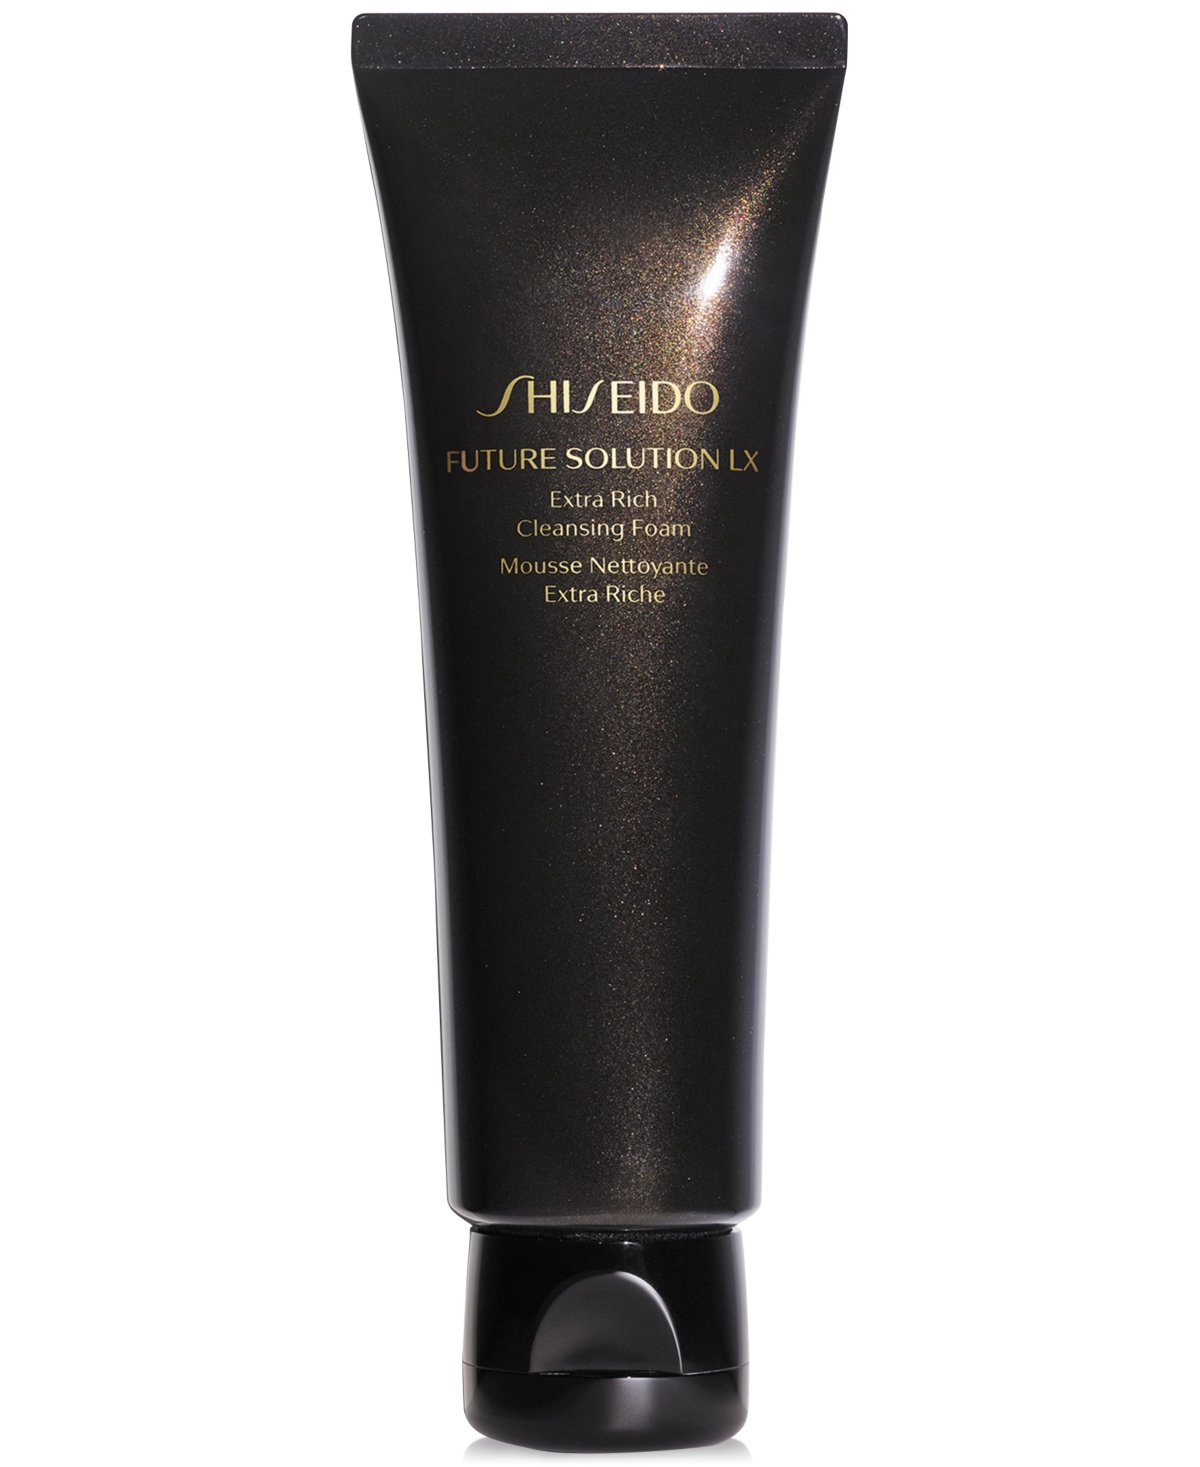 UPC 730852139183 product image for Shiseido Future Solution Lx Extra Rich Cleansing Foam, 4.7-oz. | upcitemdb.com